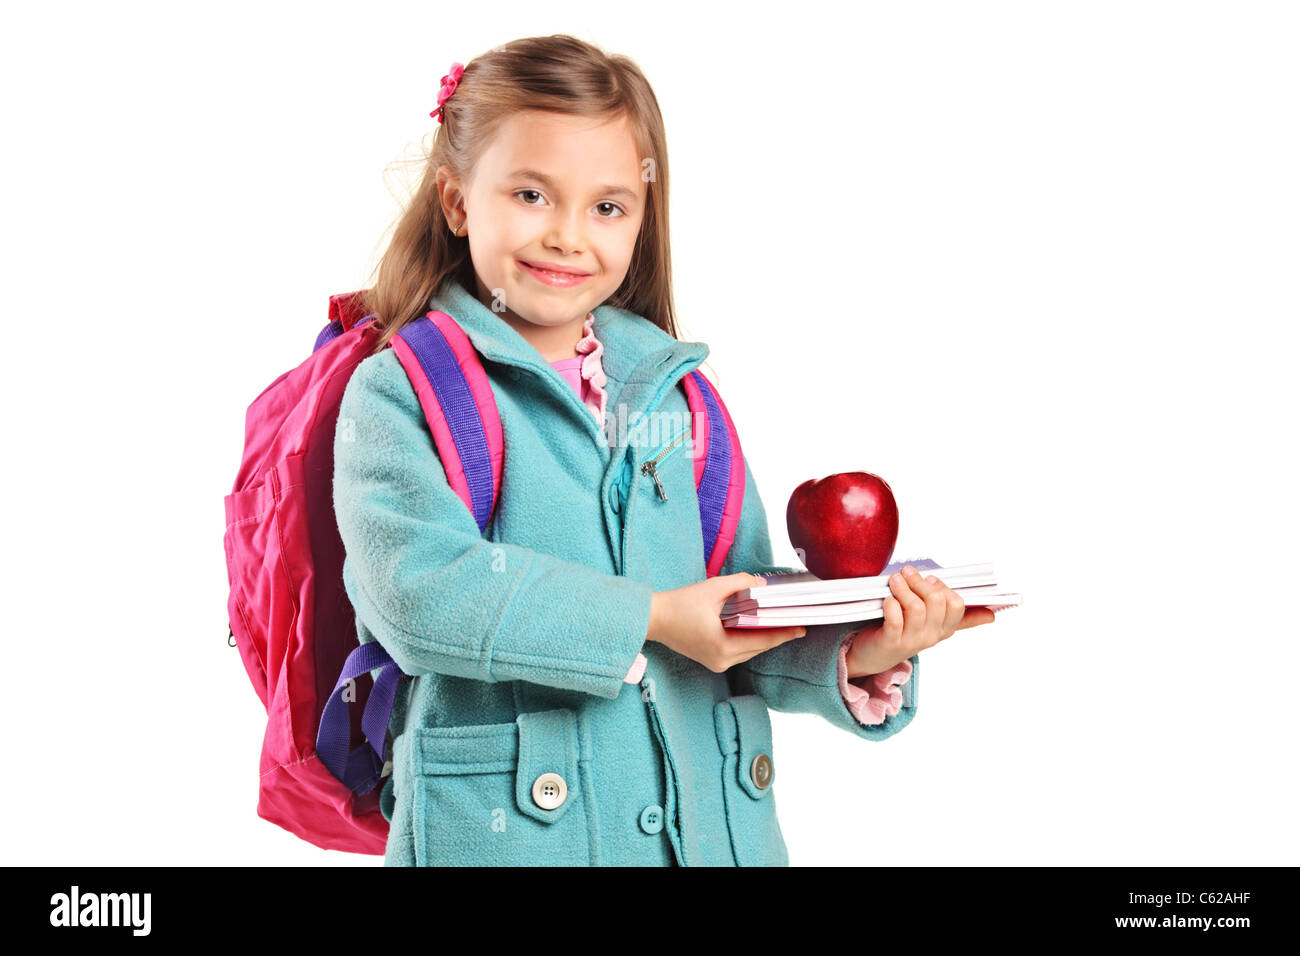 A school girl with backpack holding notebooks and red apple Stock Photo